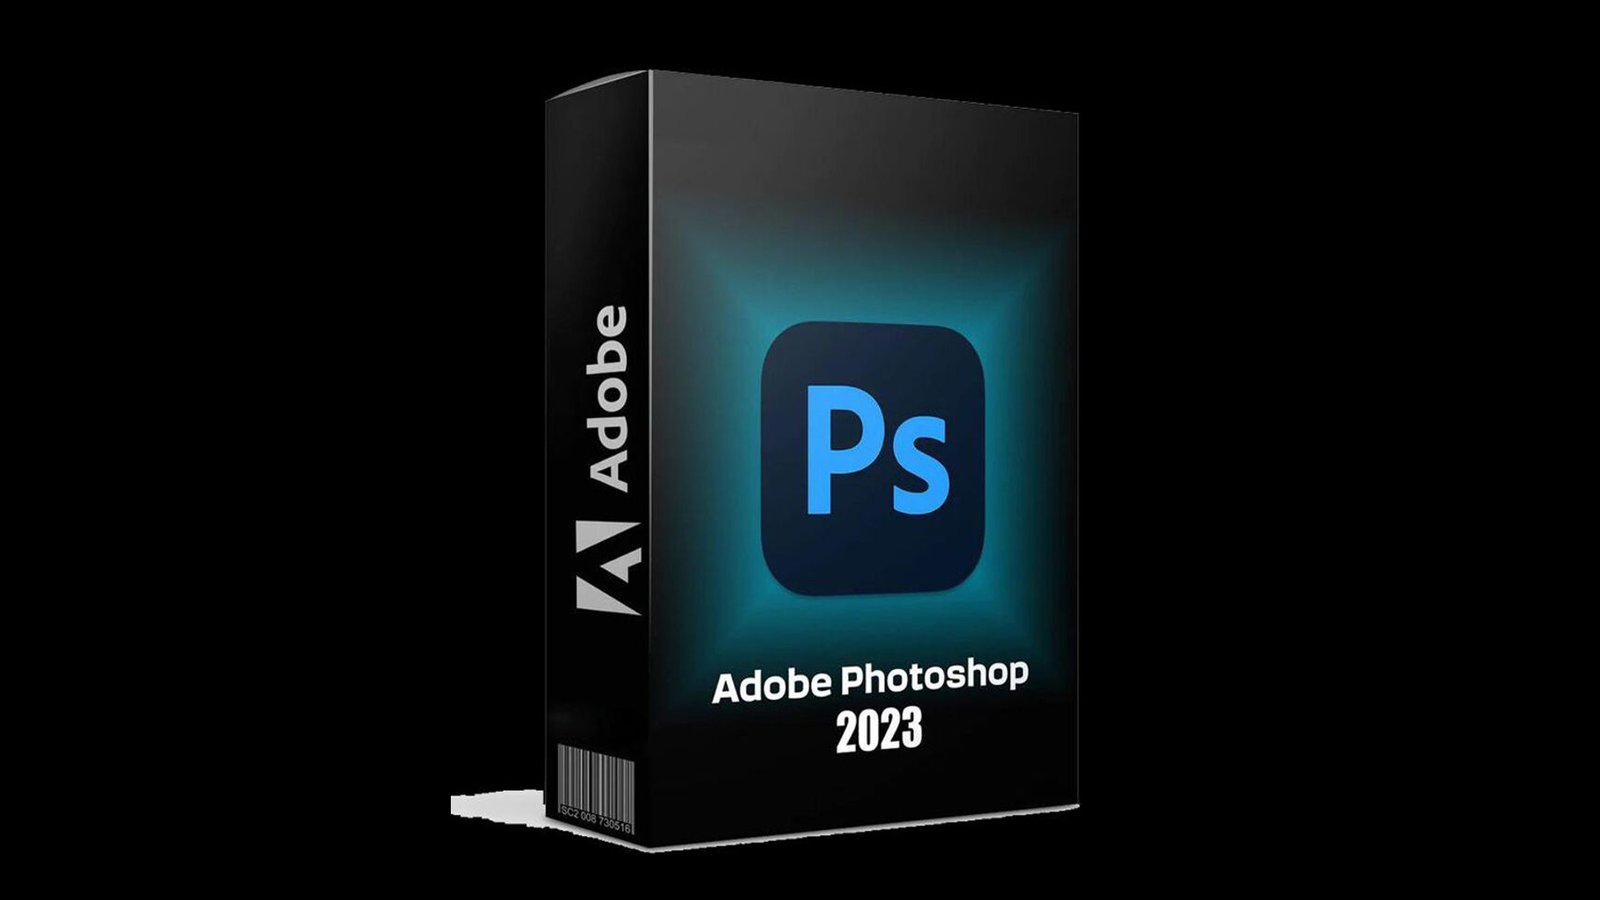 Adobe Photoshop 2023 Free Download with Crack